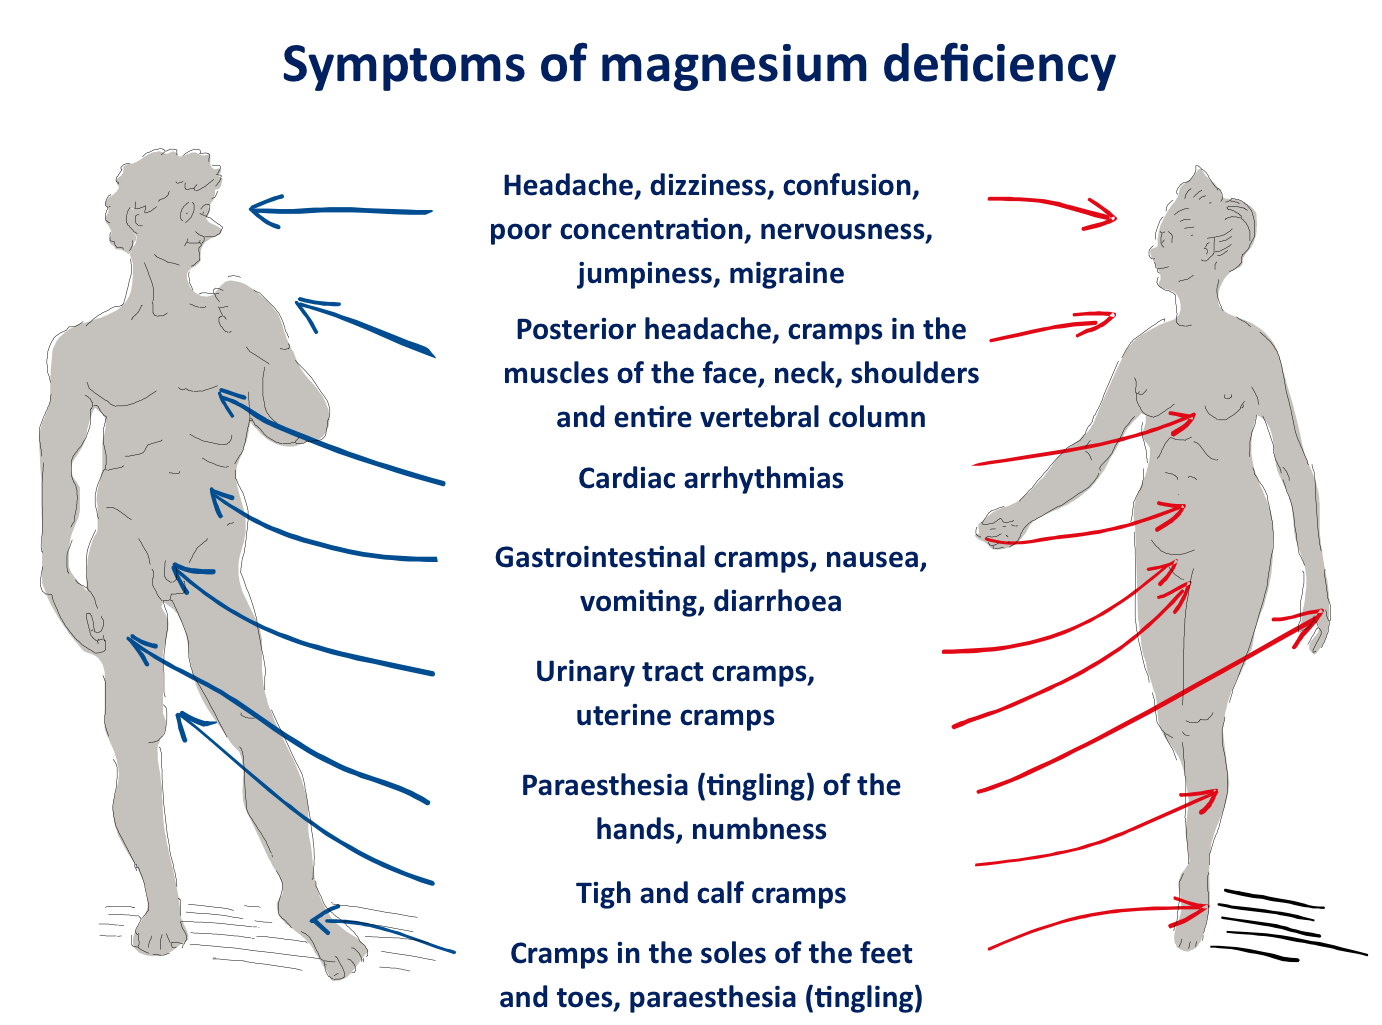 Why magnesium is important to your health